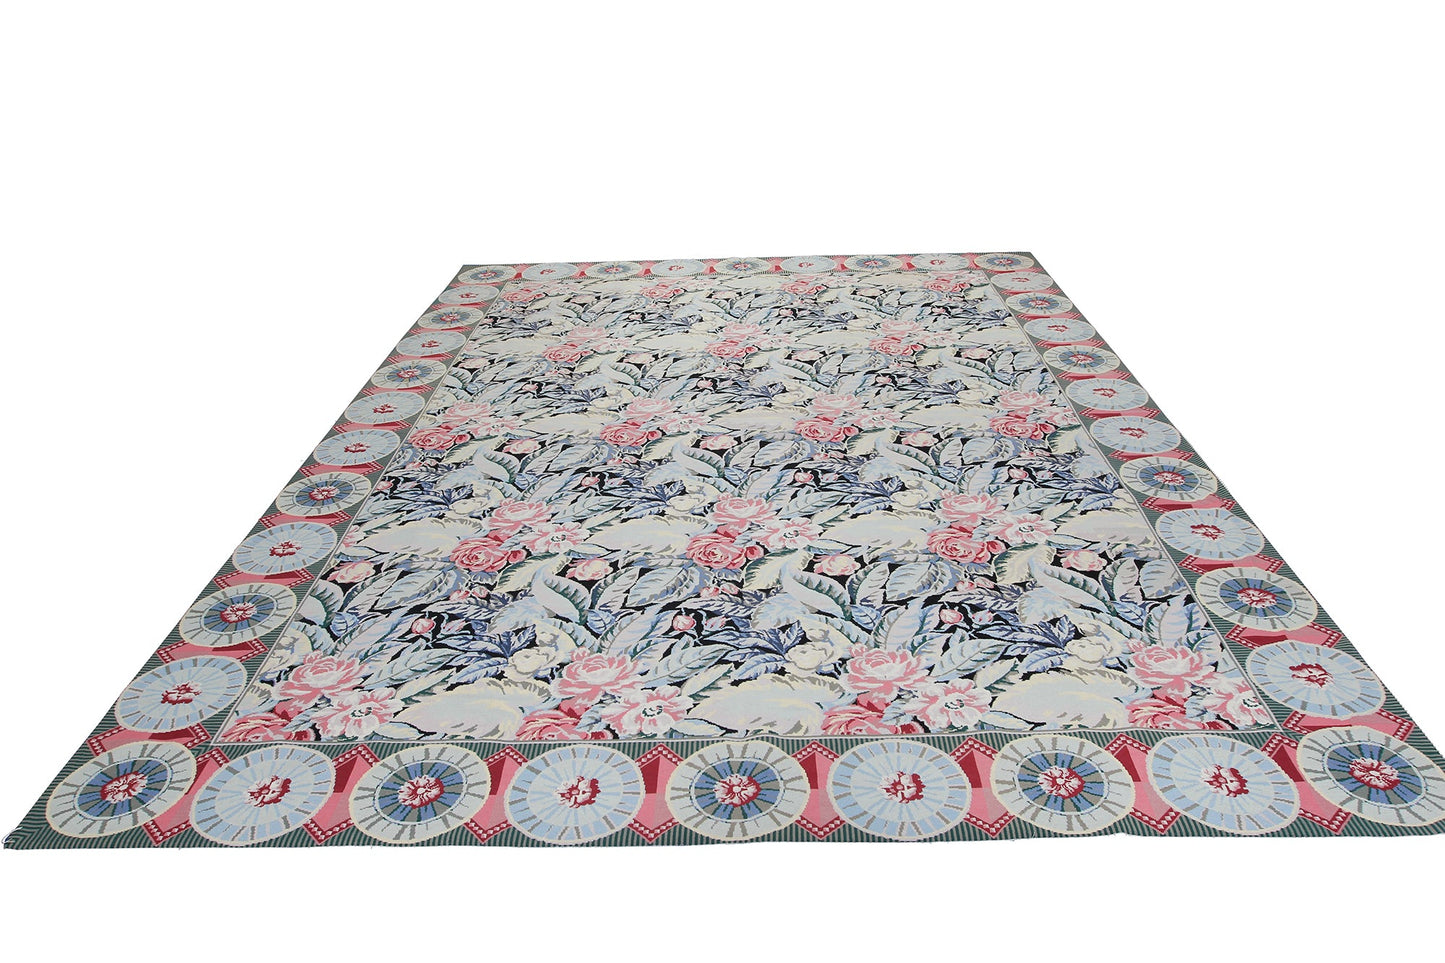 China Floral Needlepoint French Country Handmade Wool Area Rug product image #27556262084778